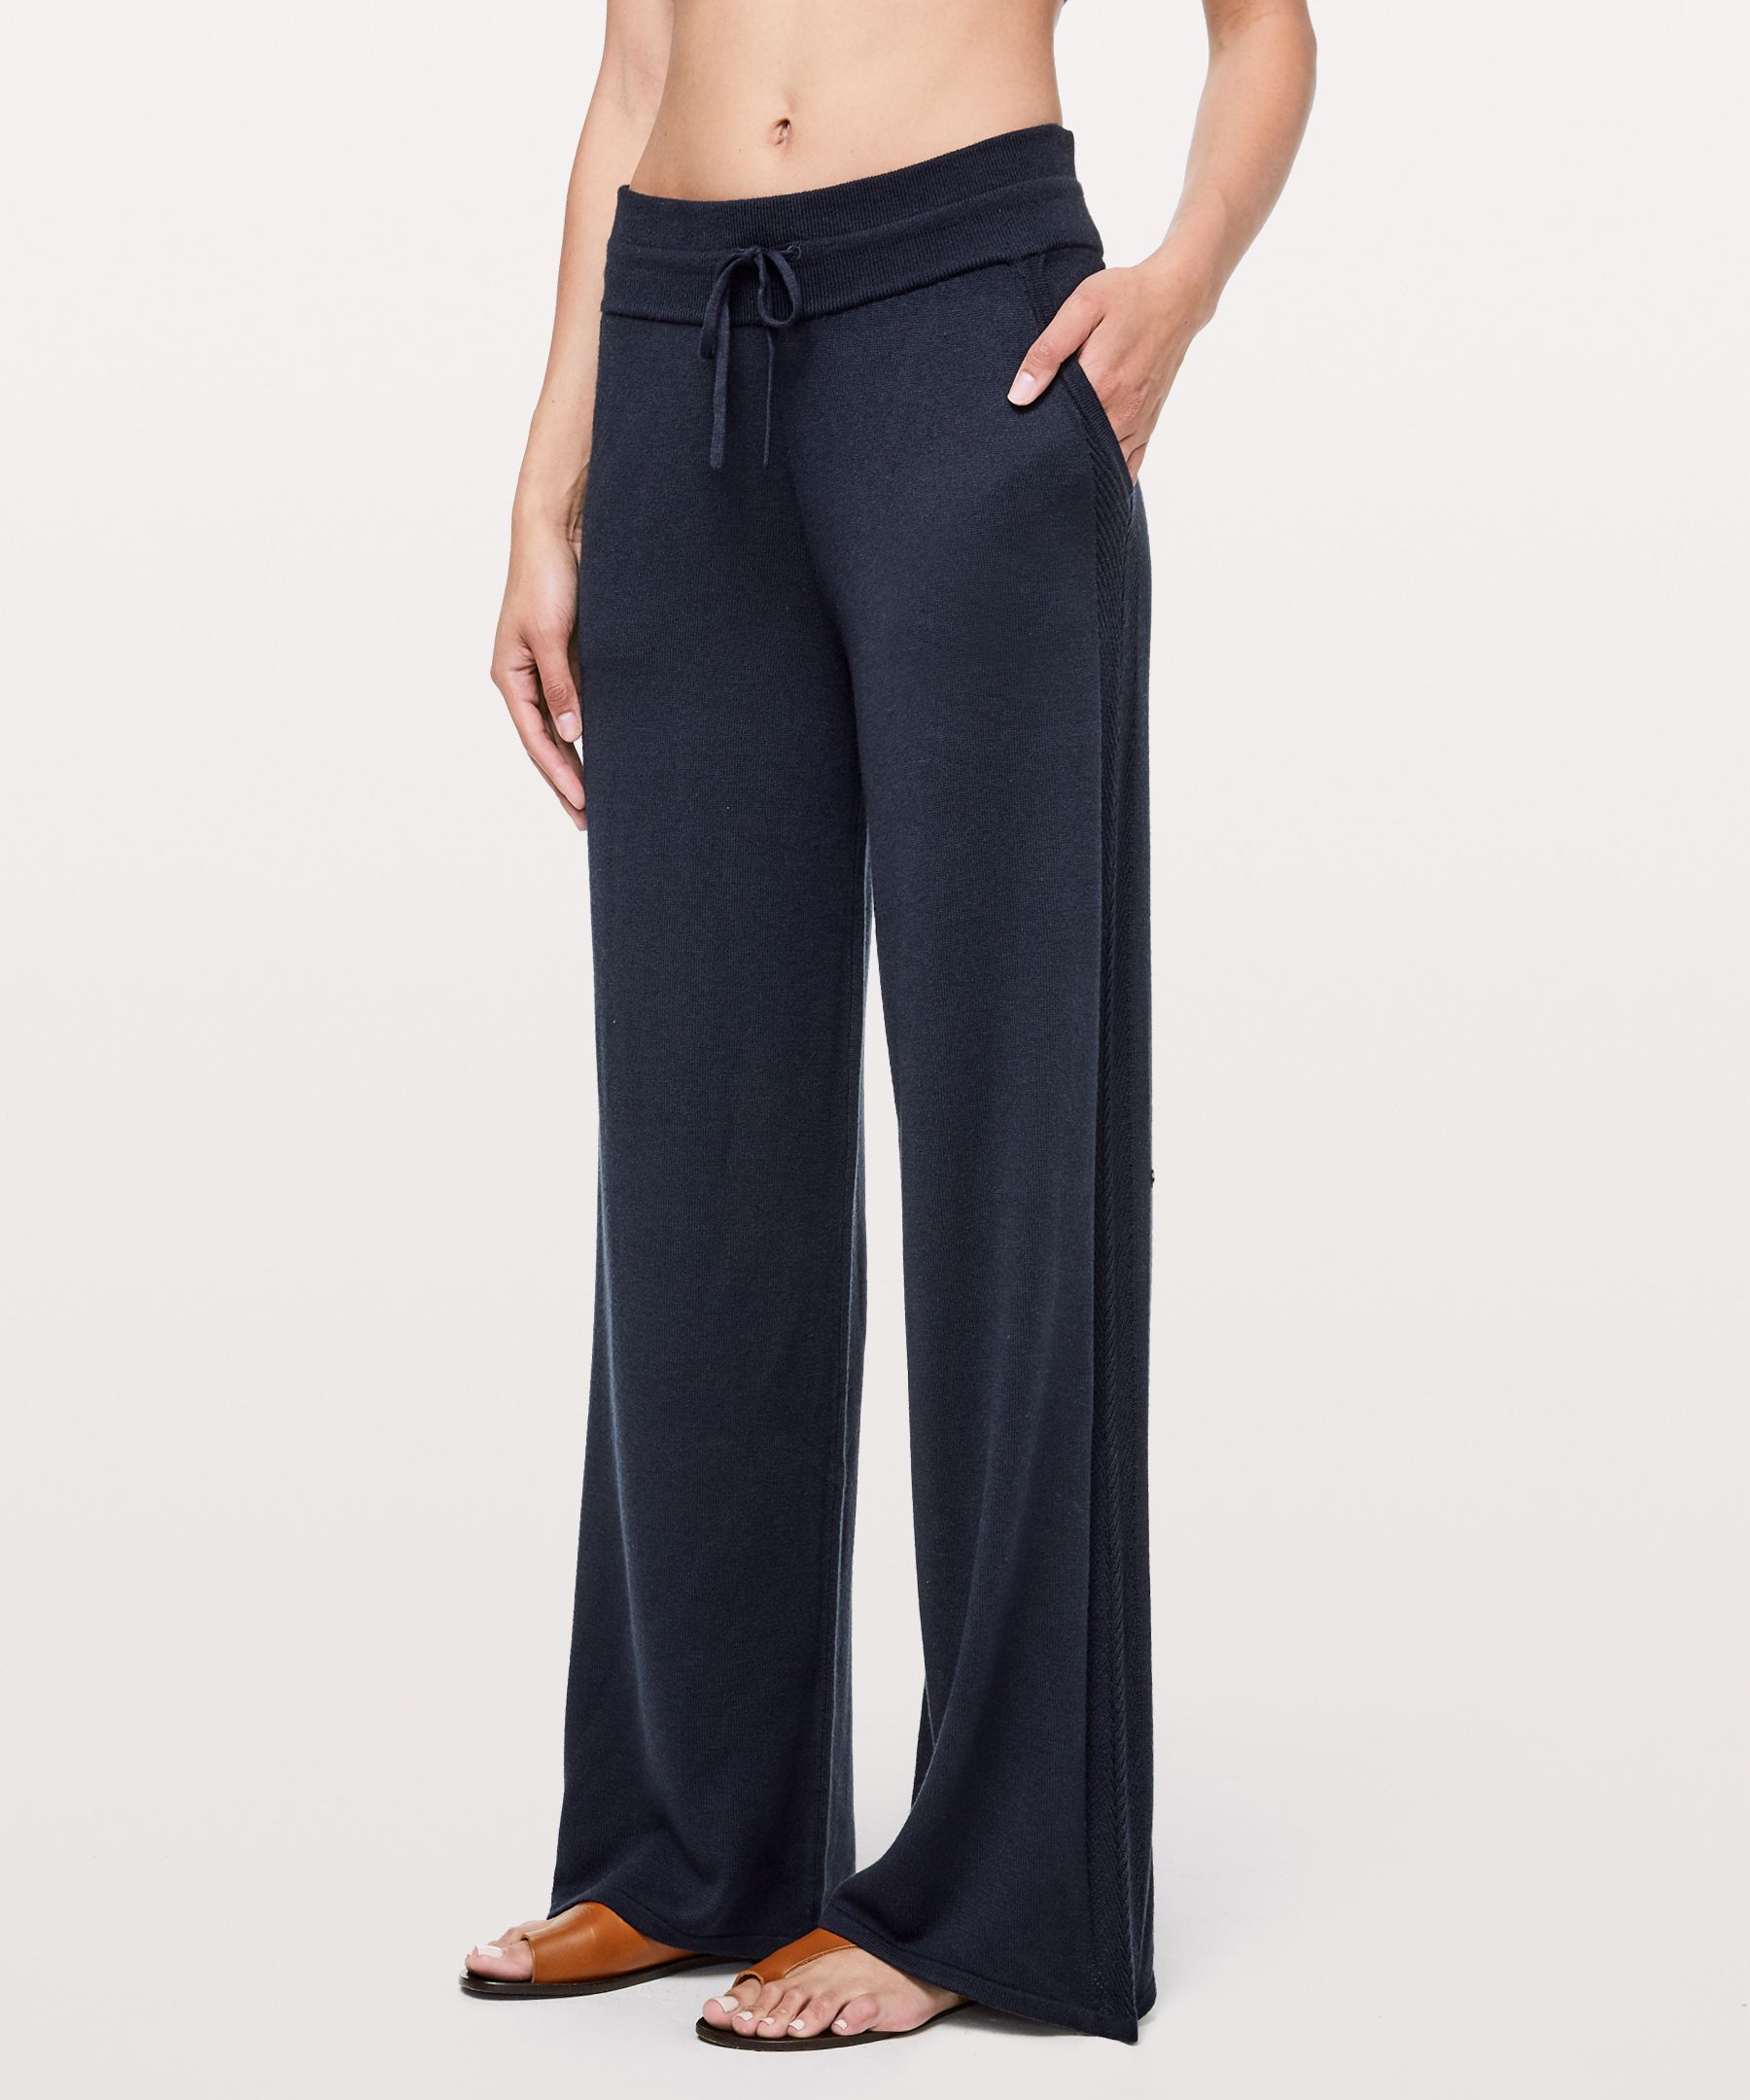 in the comfort zone pant lululemon